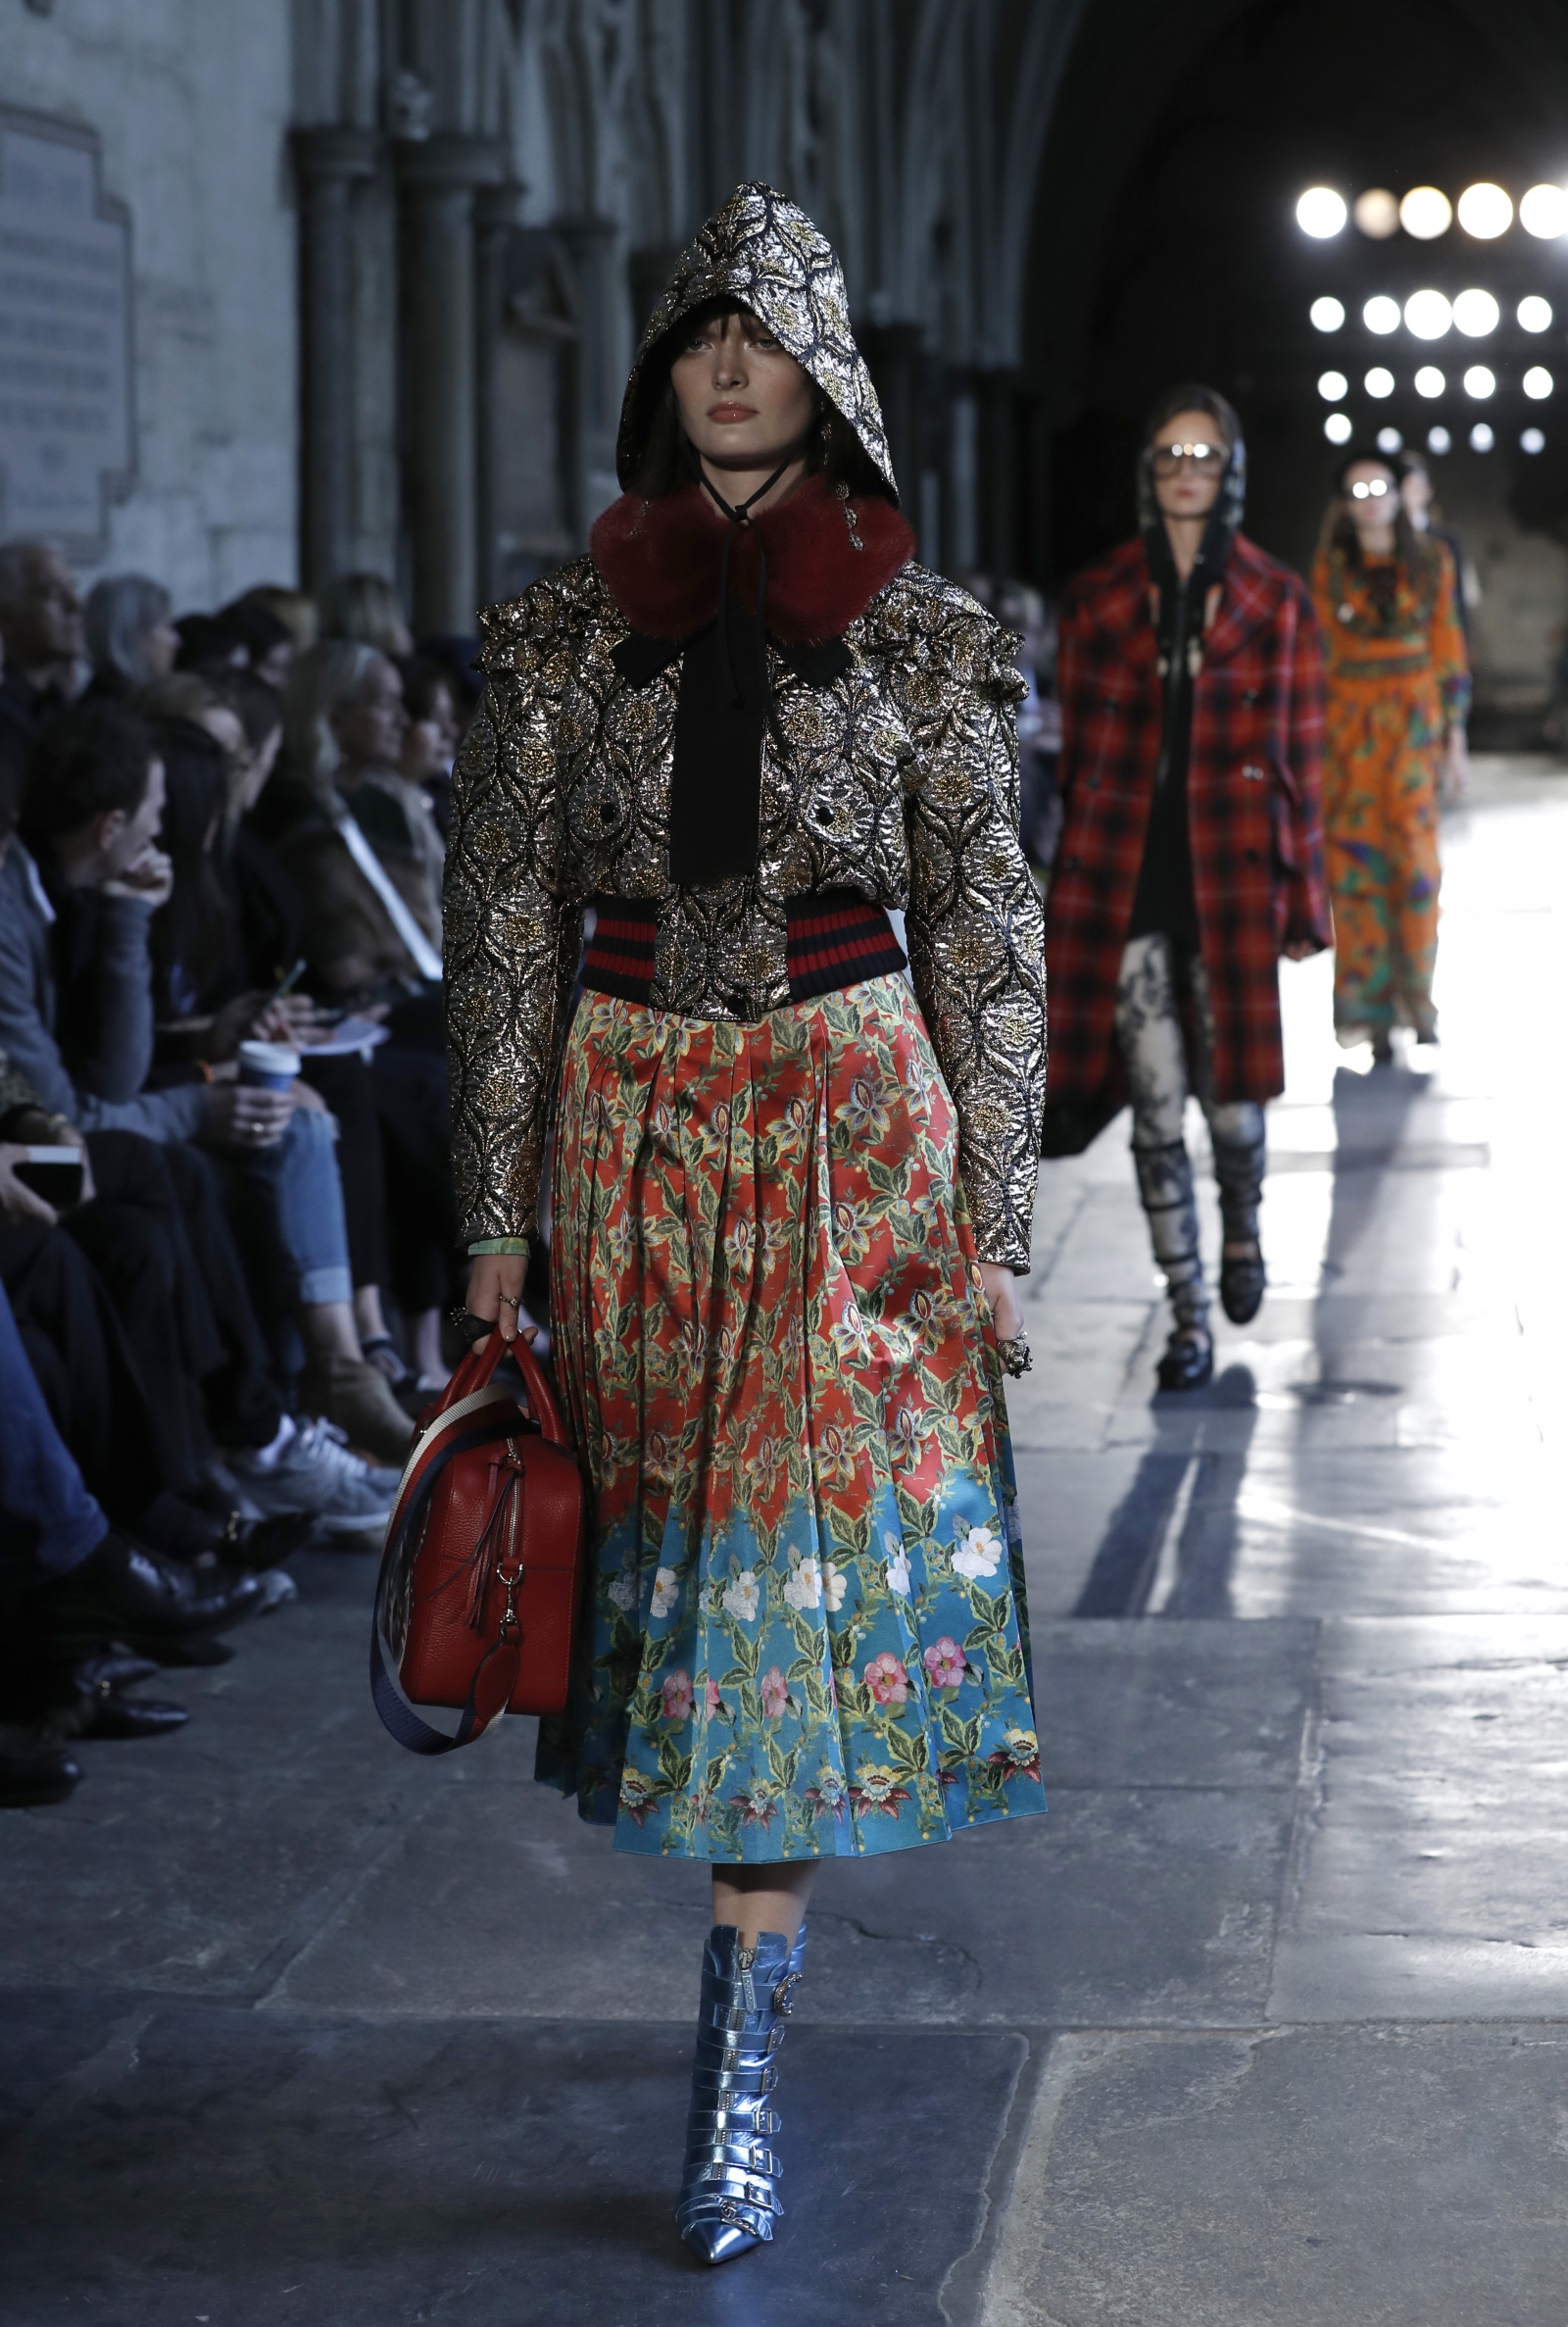 Gucci at Westminster Abbey